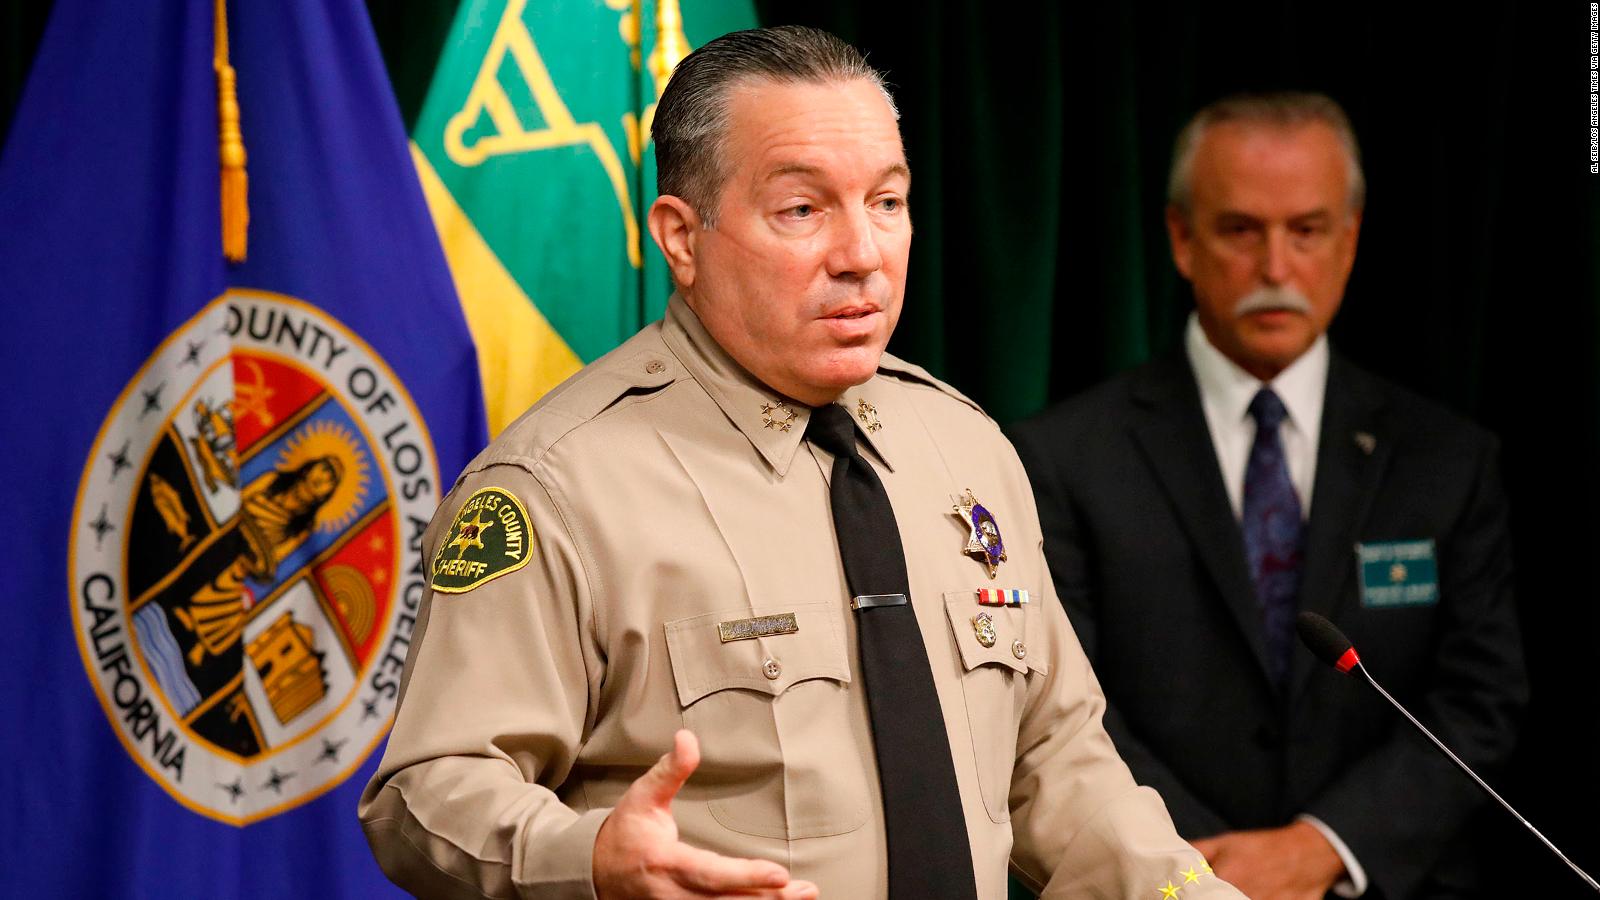 Los Angeles County Sheriff should resign over transparency issues